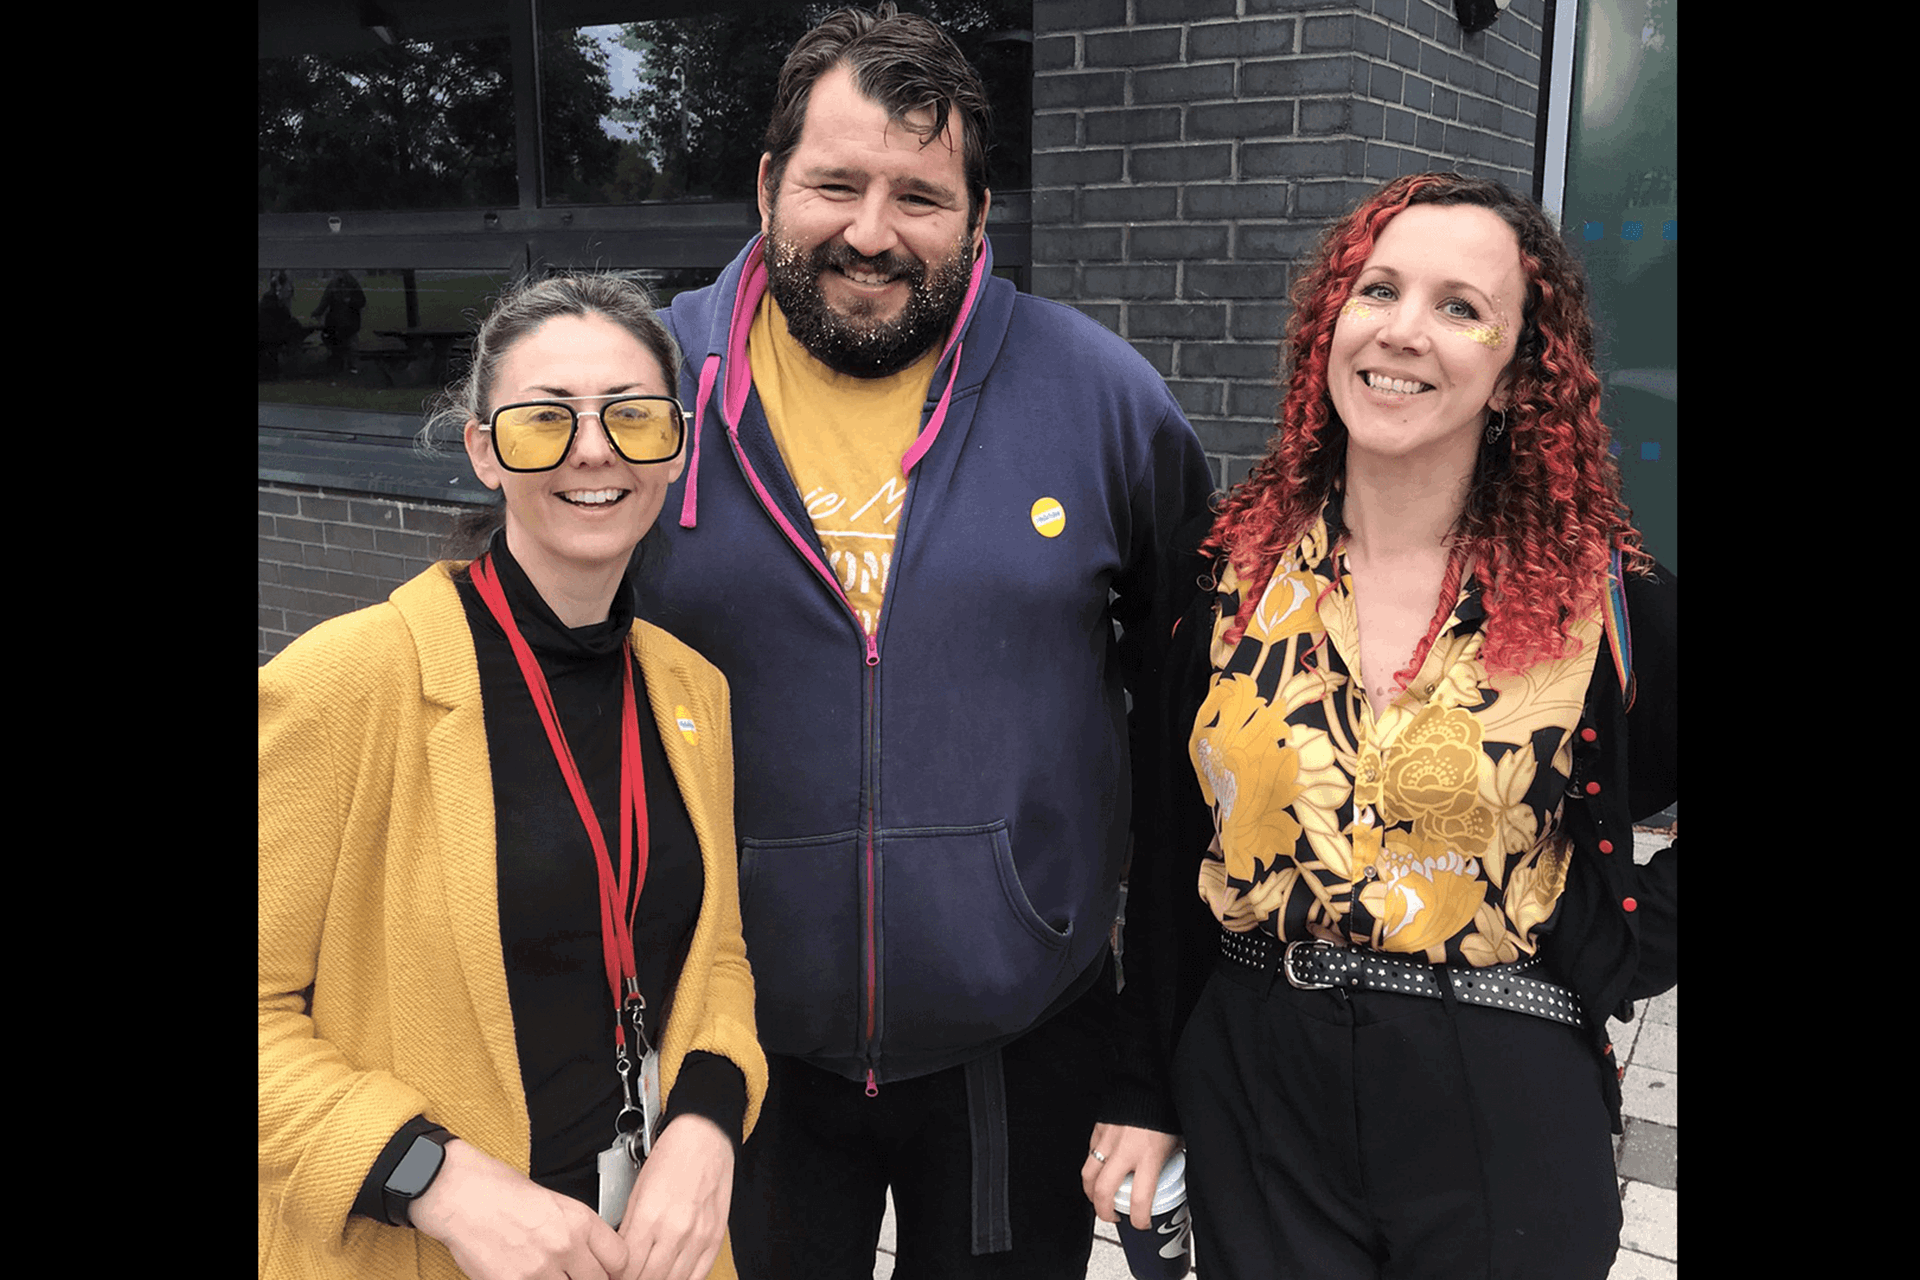 Three people stand together smiling. The person on the left wears a yellow coat and sunglasses. The person in the middle has a yellow top and yellow glitter beard and the person on the right is wearing a yellow flower shirt.